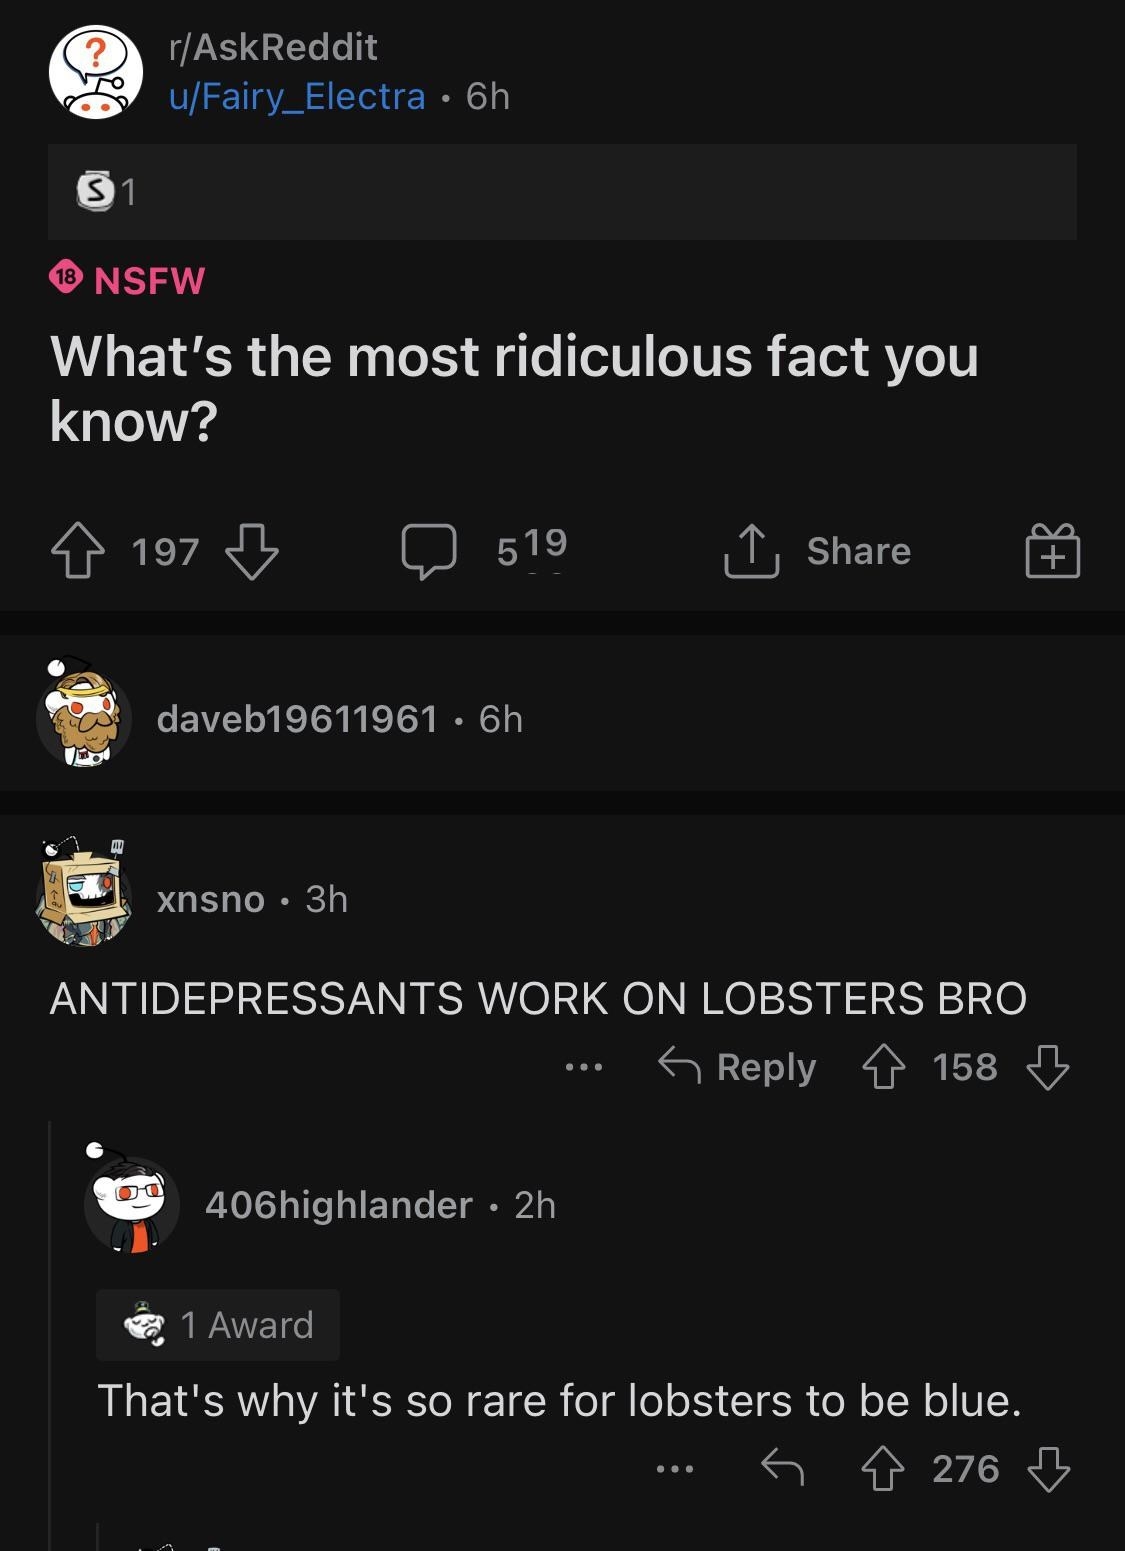 a person asks for fun facts and someone says antidepressants work on lobsters